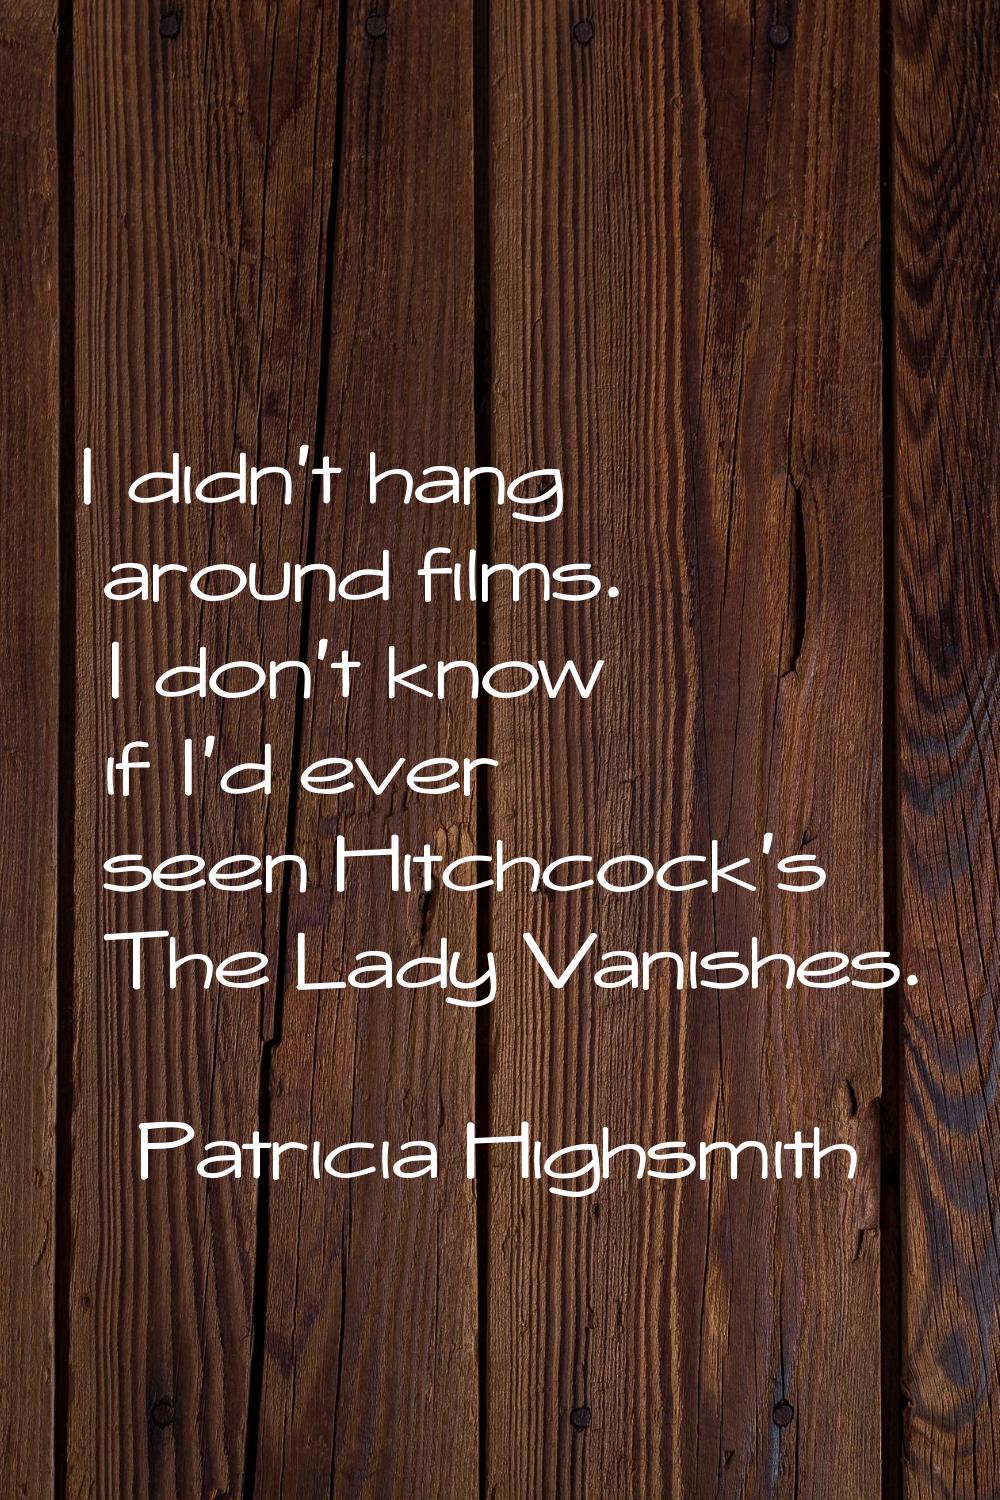 I didn't hang around films. I don't know if I'd ever seen Hitchcock's The Lady Vanishes.